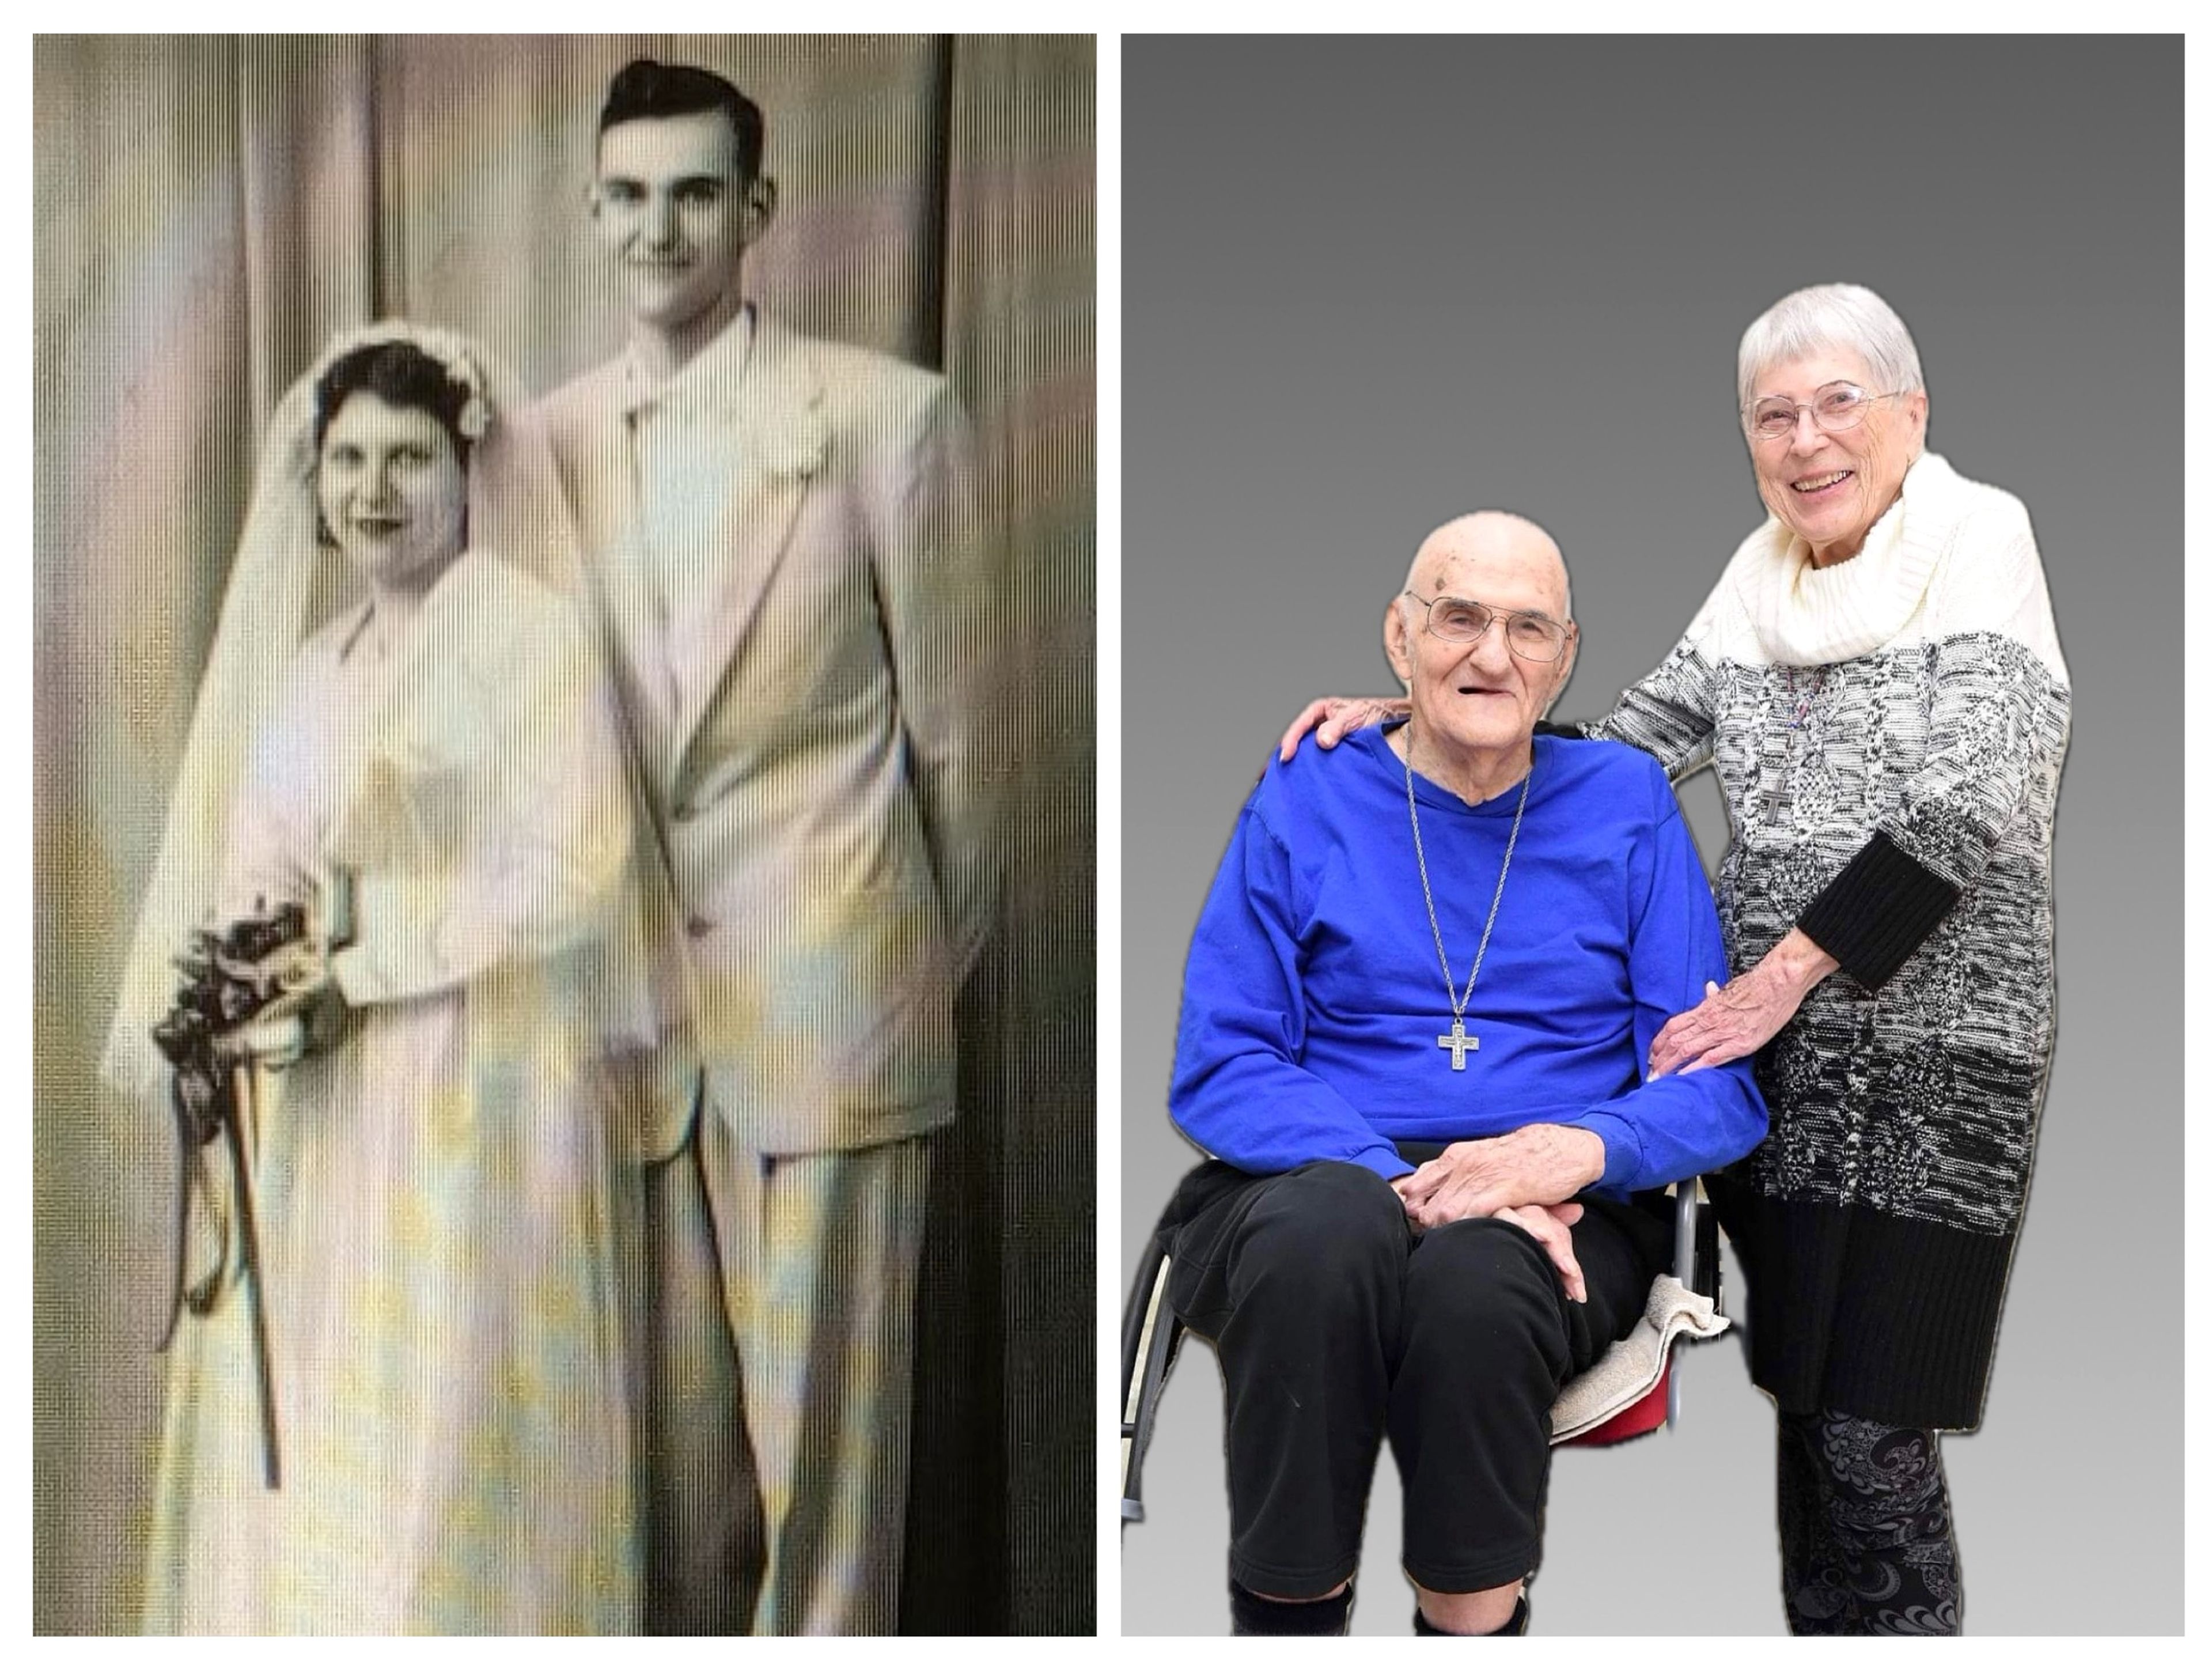 A lifetime together: Don and Mary Alice Blaylock's 70th anniversary celebration